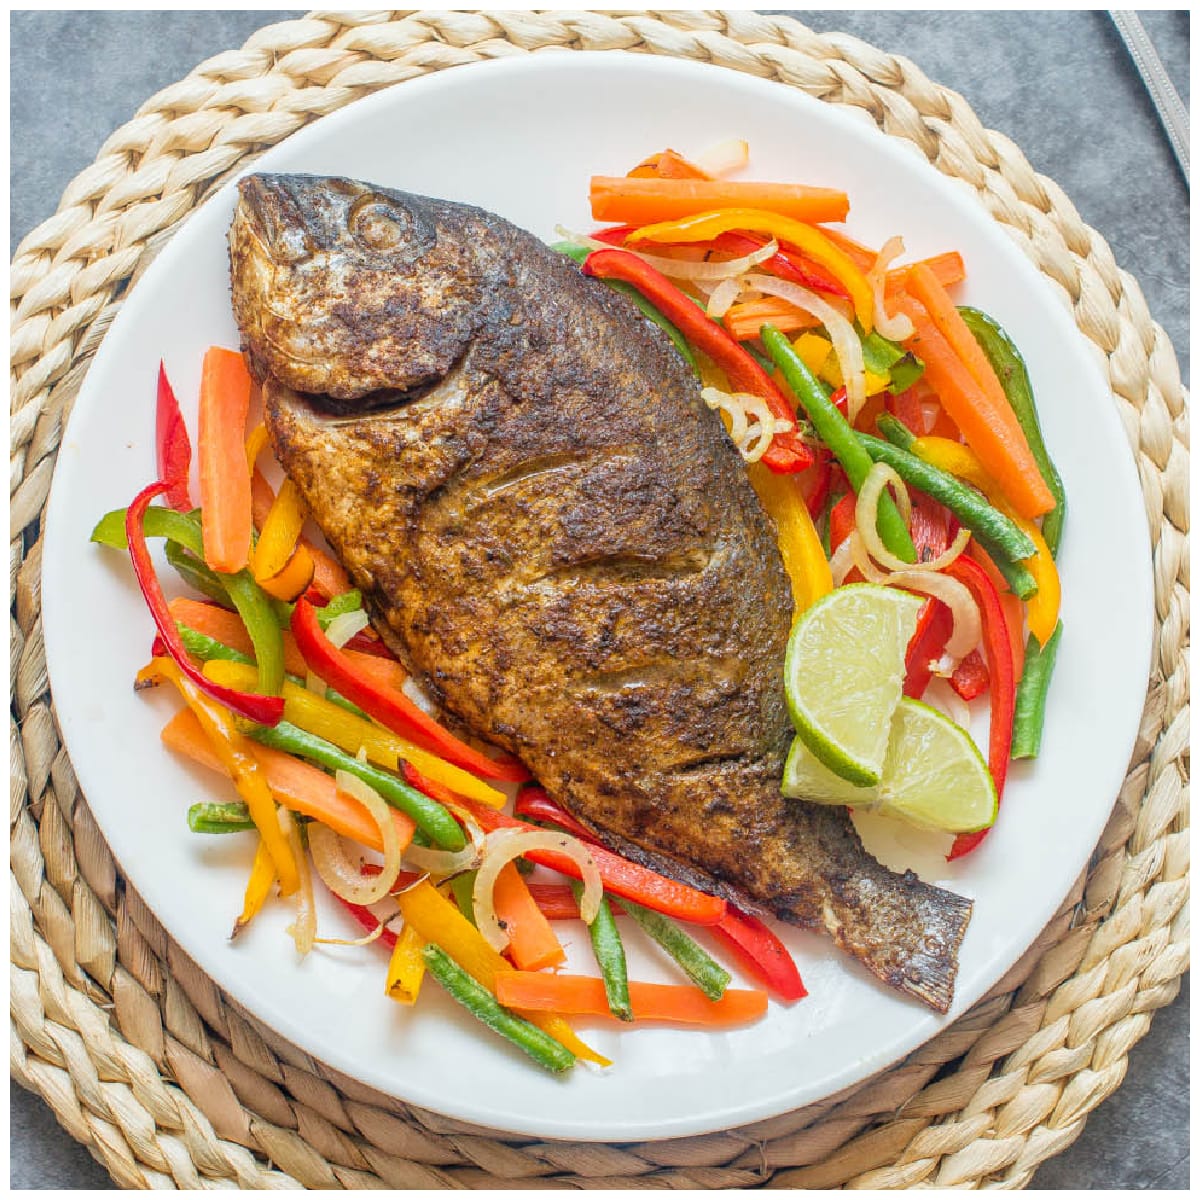 Broiled Whole Red Snapper Recipe - with Asian Chili Sauce